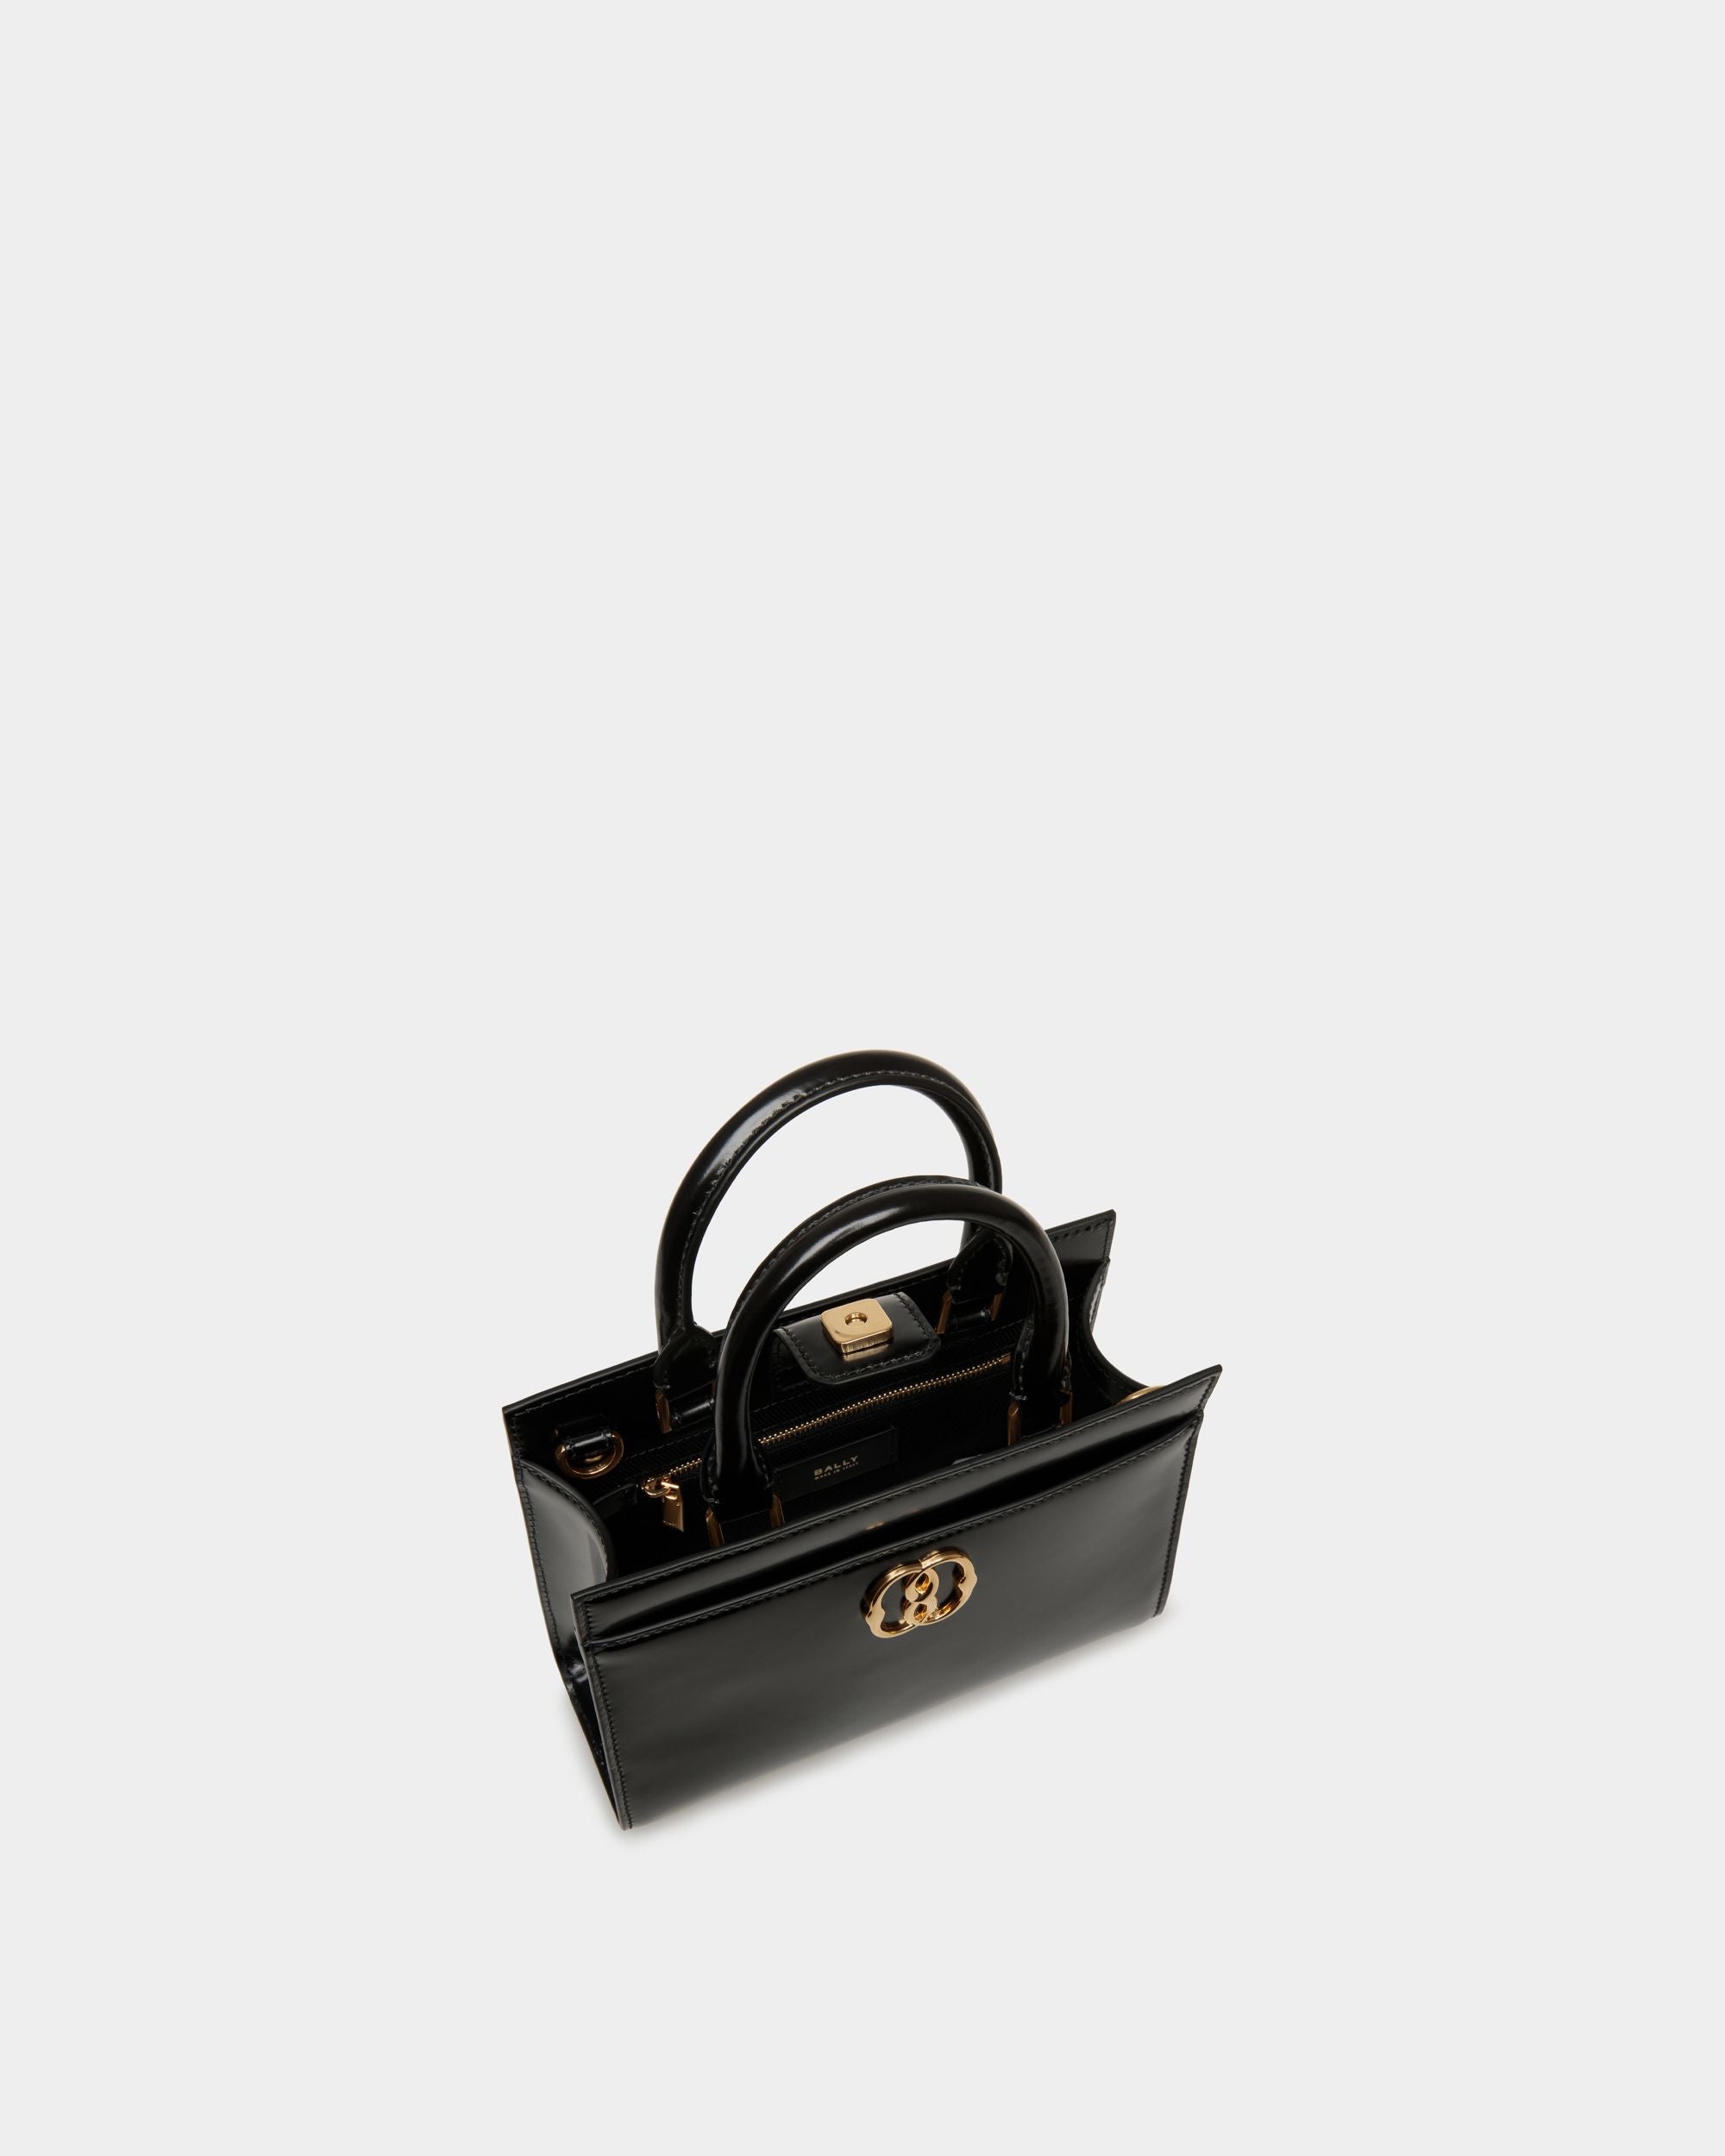 Emblem | Women's Small Tote Bag in Black Brushed Leather | Bally | Still Life Open / Inside